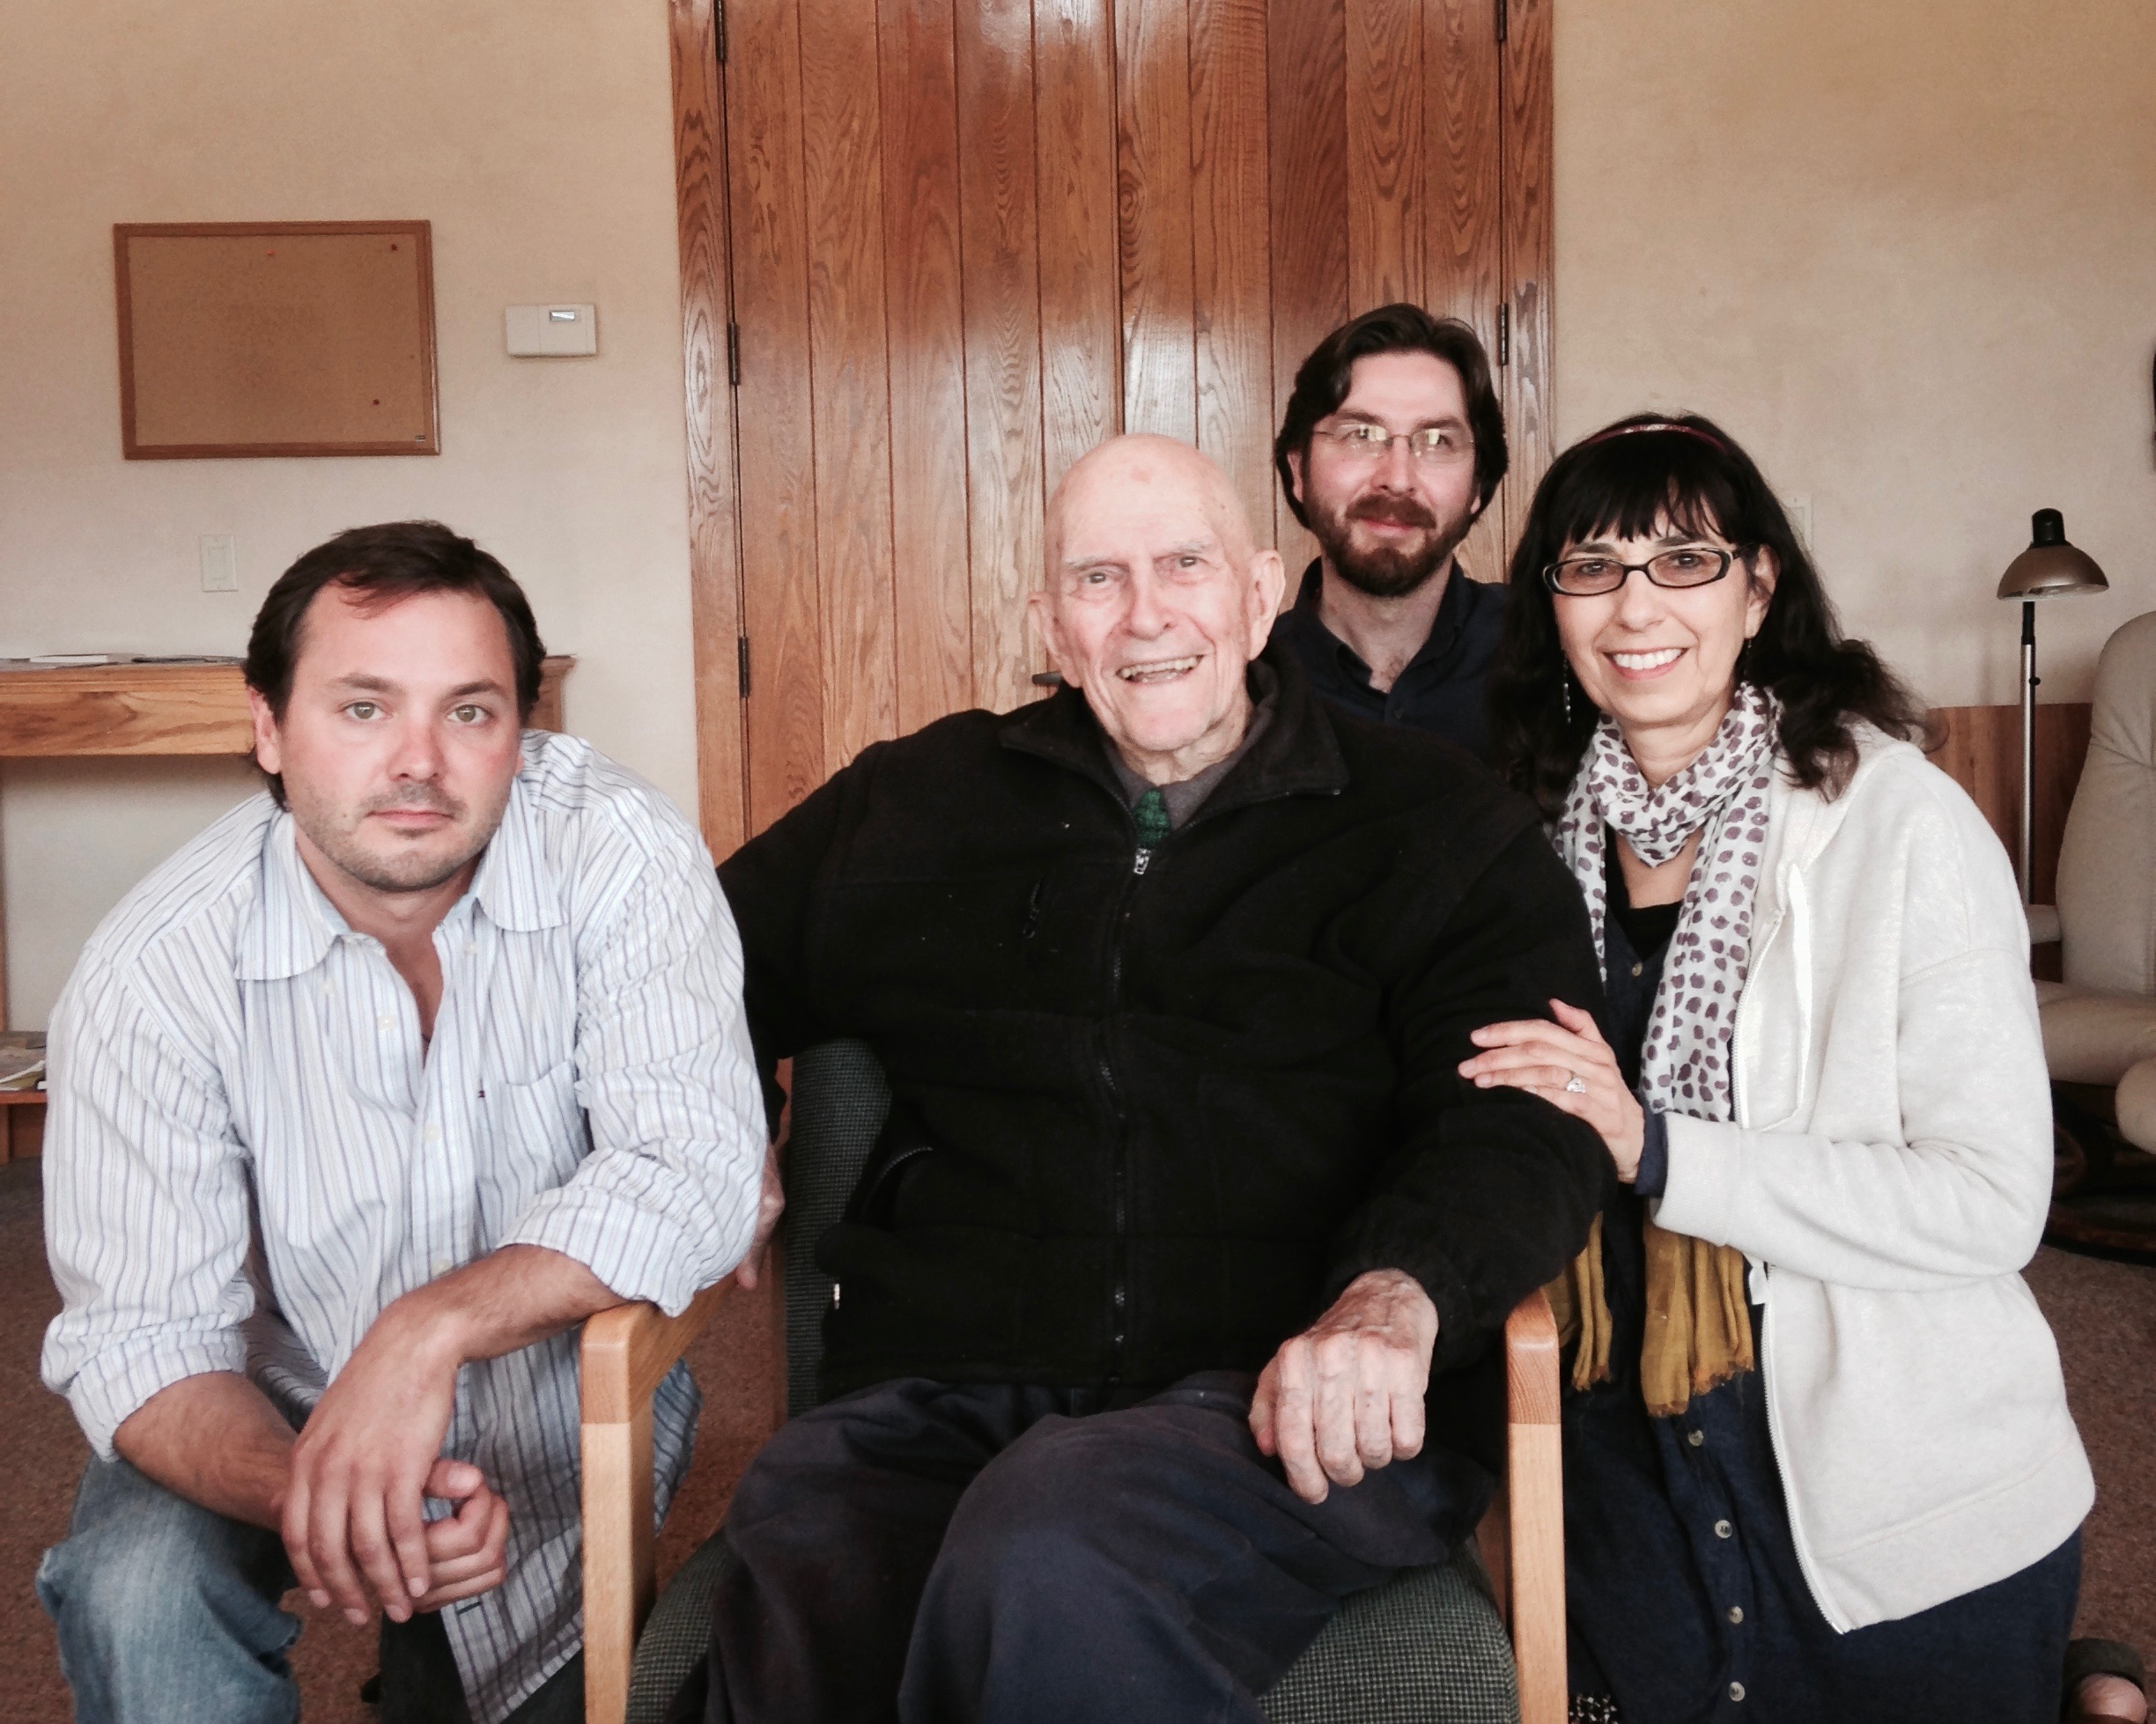 Rory McEntee, Thomas Keating, Netanel Miles-Yépez, and Beverly Lanzetta at St. Benedict's Monastery, Snowmass, CO.  (A. Bucko, 2014) (Copy) (Copy)